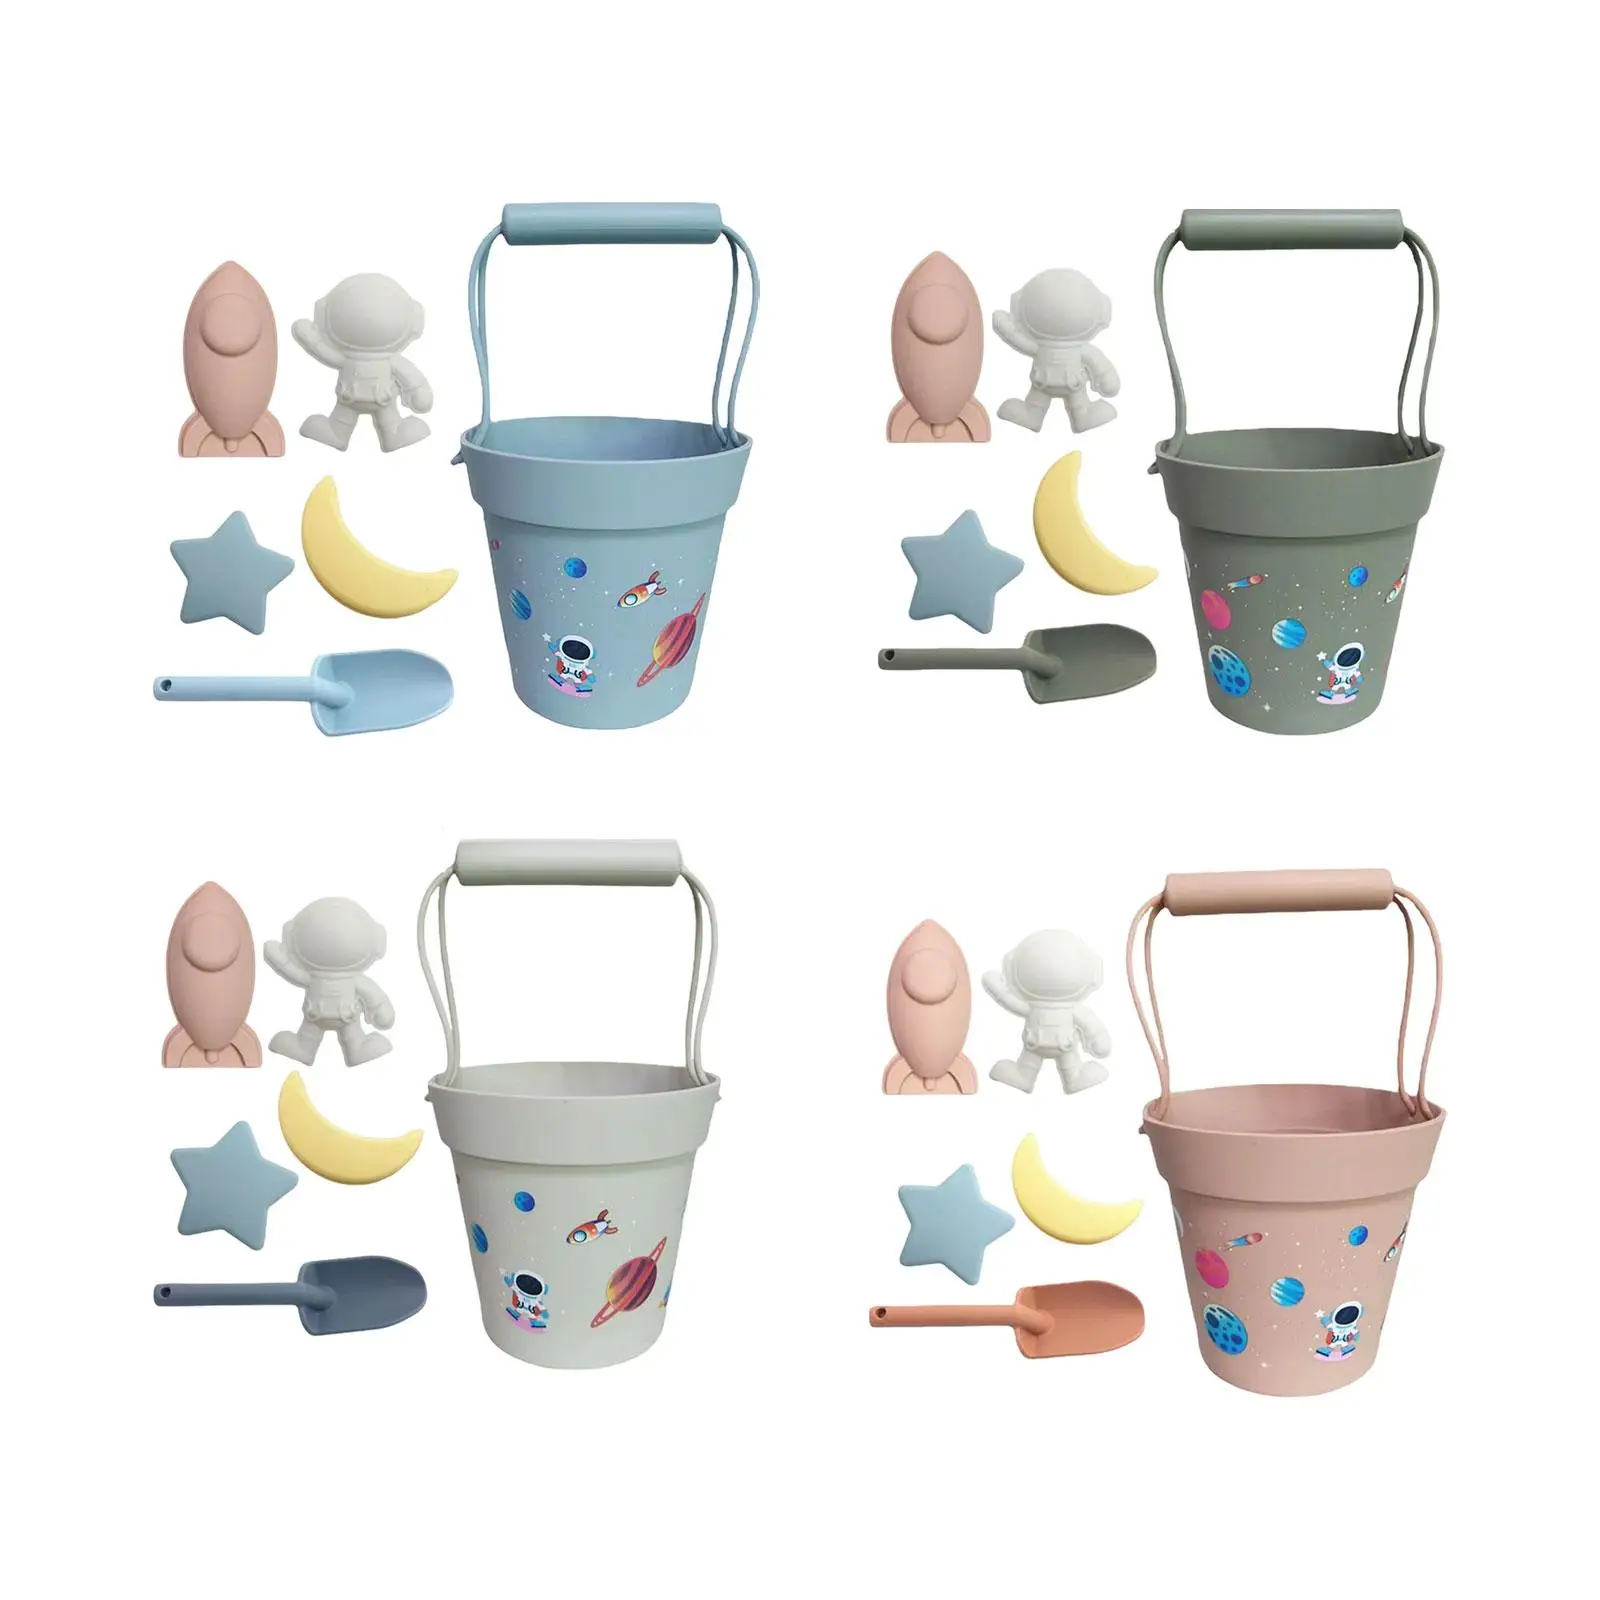 6Pcs Beach Sand Toys Sand Buckets and Shovels Set Silicone Toddler Sandbox Toys for Baby Children Boys Girls Birthday Gifts